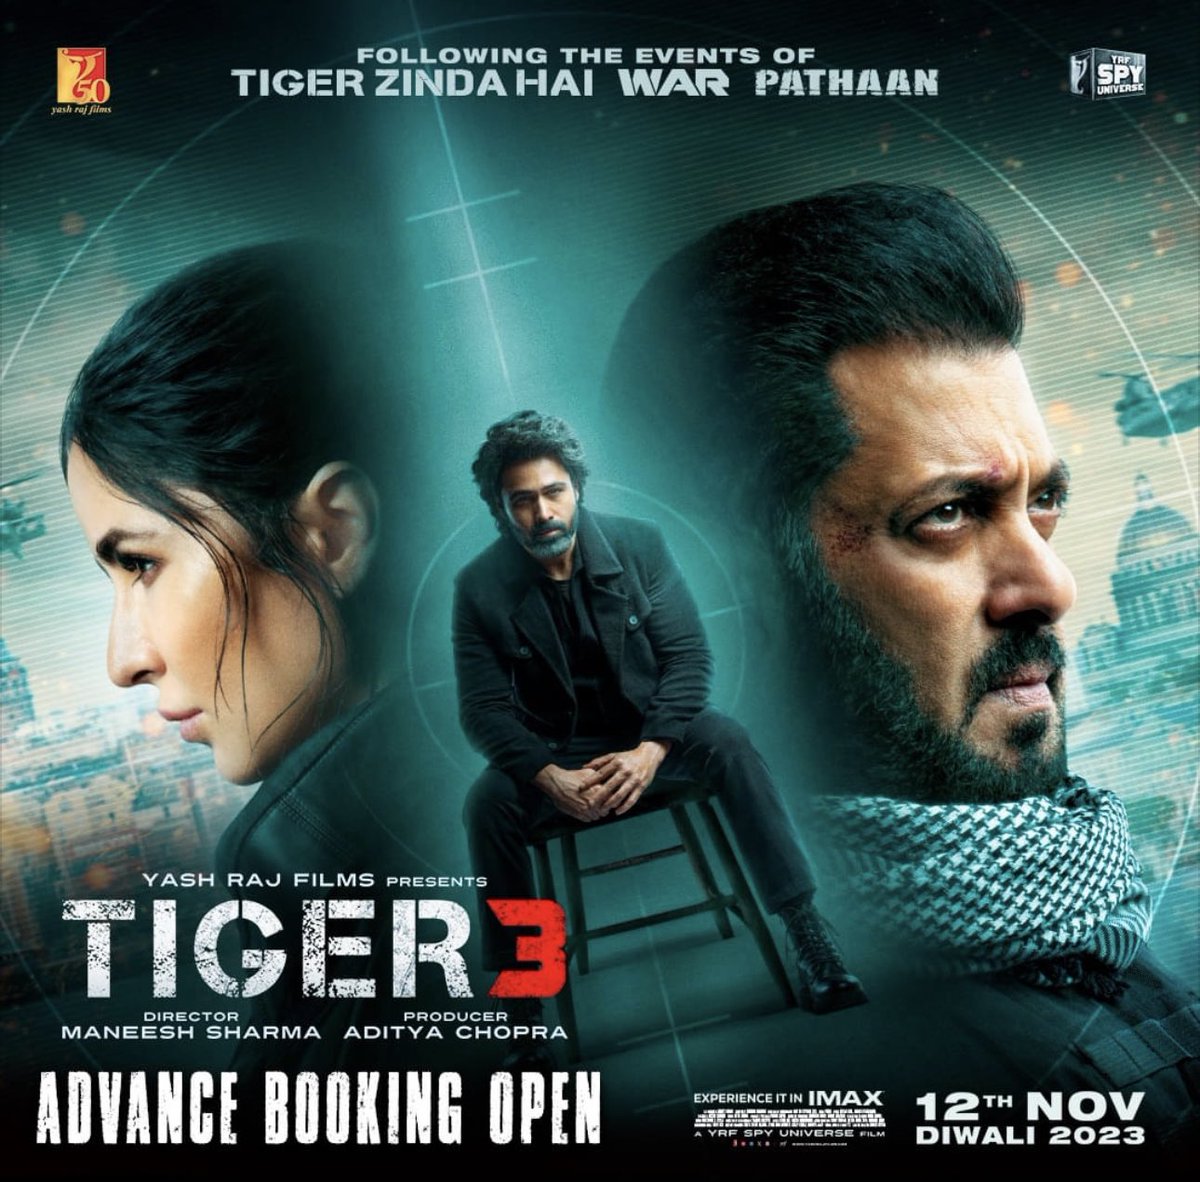 Why isn’t #BoycottTiger3 trending yet? It’s only 12 days away.😱 Have people given in? I can see lot of people going and watching #BoycottBollywood movies. Are they going to watch this as well?